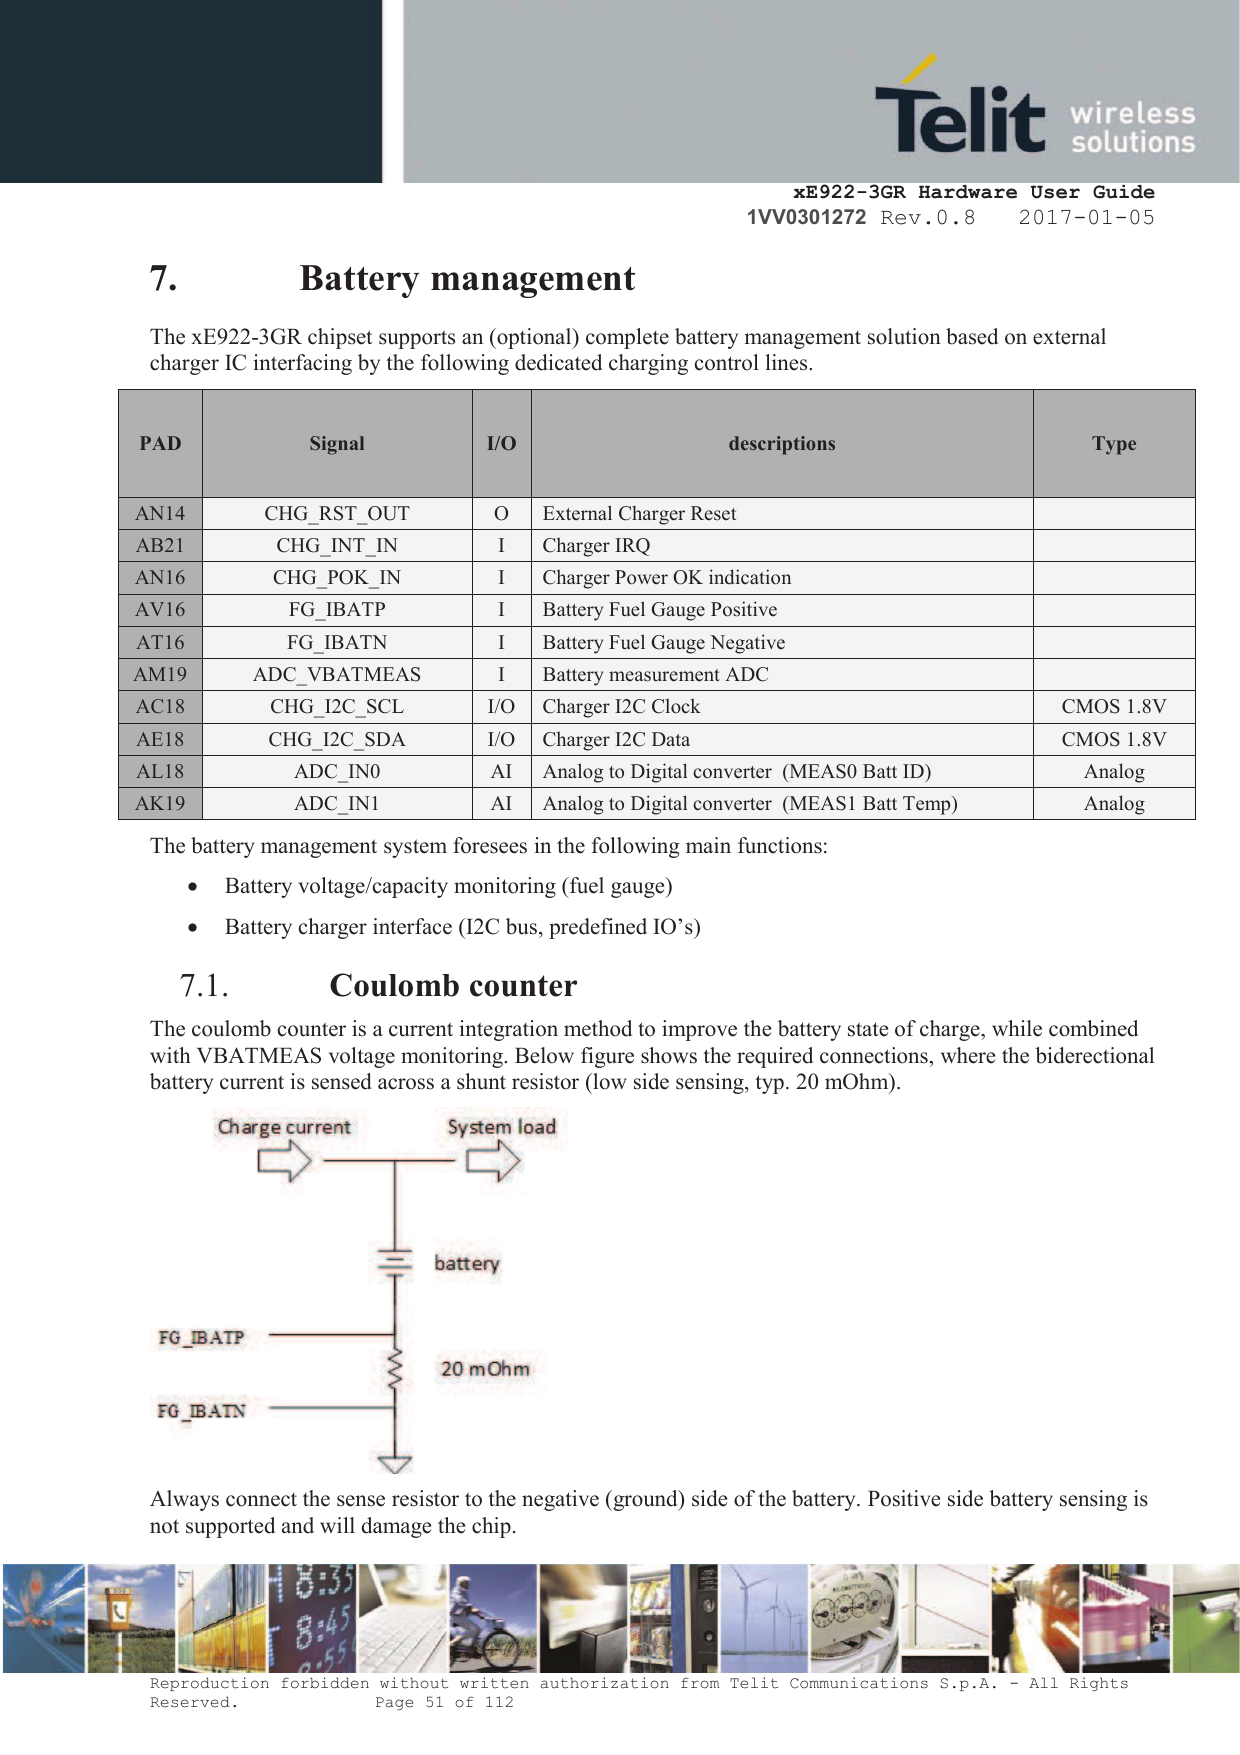     xE922-3GR Hardware User Guide 1VV0301272 Rev.0.8   2017-01-05 Reproduction forbidden without written authorization from Telit Communications S.p.A. - All Rights Reserved.    Page 51 of 112  7. Battery management  The xE922-3GR chipset supports an (optional) complete battery management solution based on external charger IC interfacing by the following dedicated charging control lines. PAD Signal I/O descriptions  Type AN14 CHG_RST_OUT O External Charger Reset   AB21 CHG_INT_IN I Charger IRQ   AN16 CHG_POK_IN I Charger Power OK indication   AV16 FG_IBATP I Battery Fuel Gauge Positive   AT16 FG_IBATN I Battery Fuel Gauge Negative   AM19 ADC_VBATMEAS I Battery measurement ADC    AC18 CHG_I2C_SCL I/O Charger I2C Clock CMOS 1.8V AE18 CHG_I2C_SDA I/O Charger I2C Data CMOS 1.8V AL18 ADC_IN0 AI Analog to Digital converter  (MEAS0 Batt ID) Analog AK19 ADC_IN1 AI Analog to Digital converter  (MEAS1 Batt Temp) Analog The battery management system foresees in the following main functions: · Battery voltage/capacity monitoring (fuel gauge) · Battery charger interface (I2C bus, predefined IO’s) 7.1. Coulomb counter  The coulomb counter is a current integration method to improve the battery state of charge, while combined with VBATMEAS voltage monitoring. Below figure shows the required connections, where the biderectional battery current is sensed across a shunt resistor (low side sensing, typ. 20 mOhm).   Always connect the sense resistor to the negative (ground) side of the battery. Positive side battery sensing is not supported and will damage the chip.  